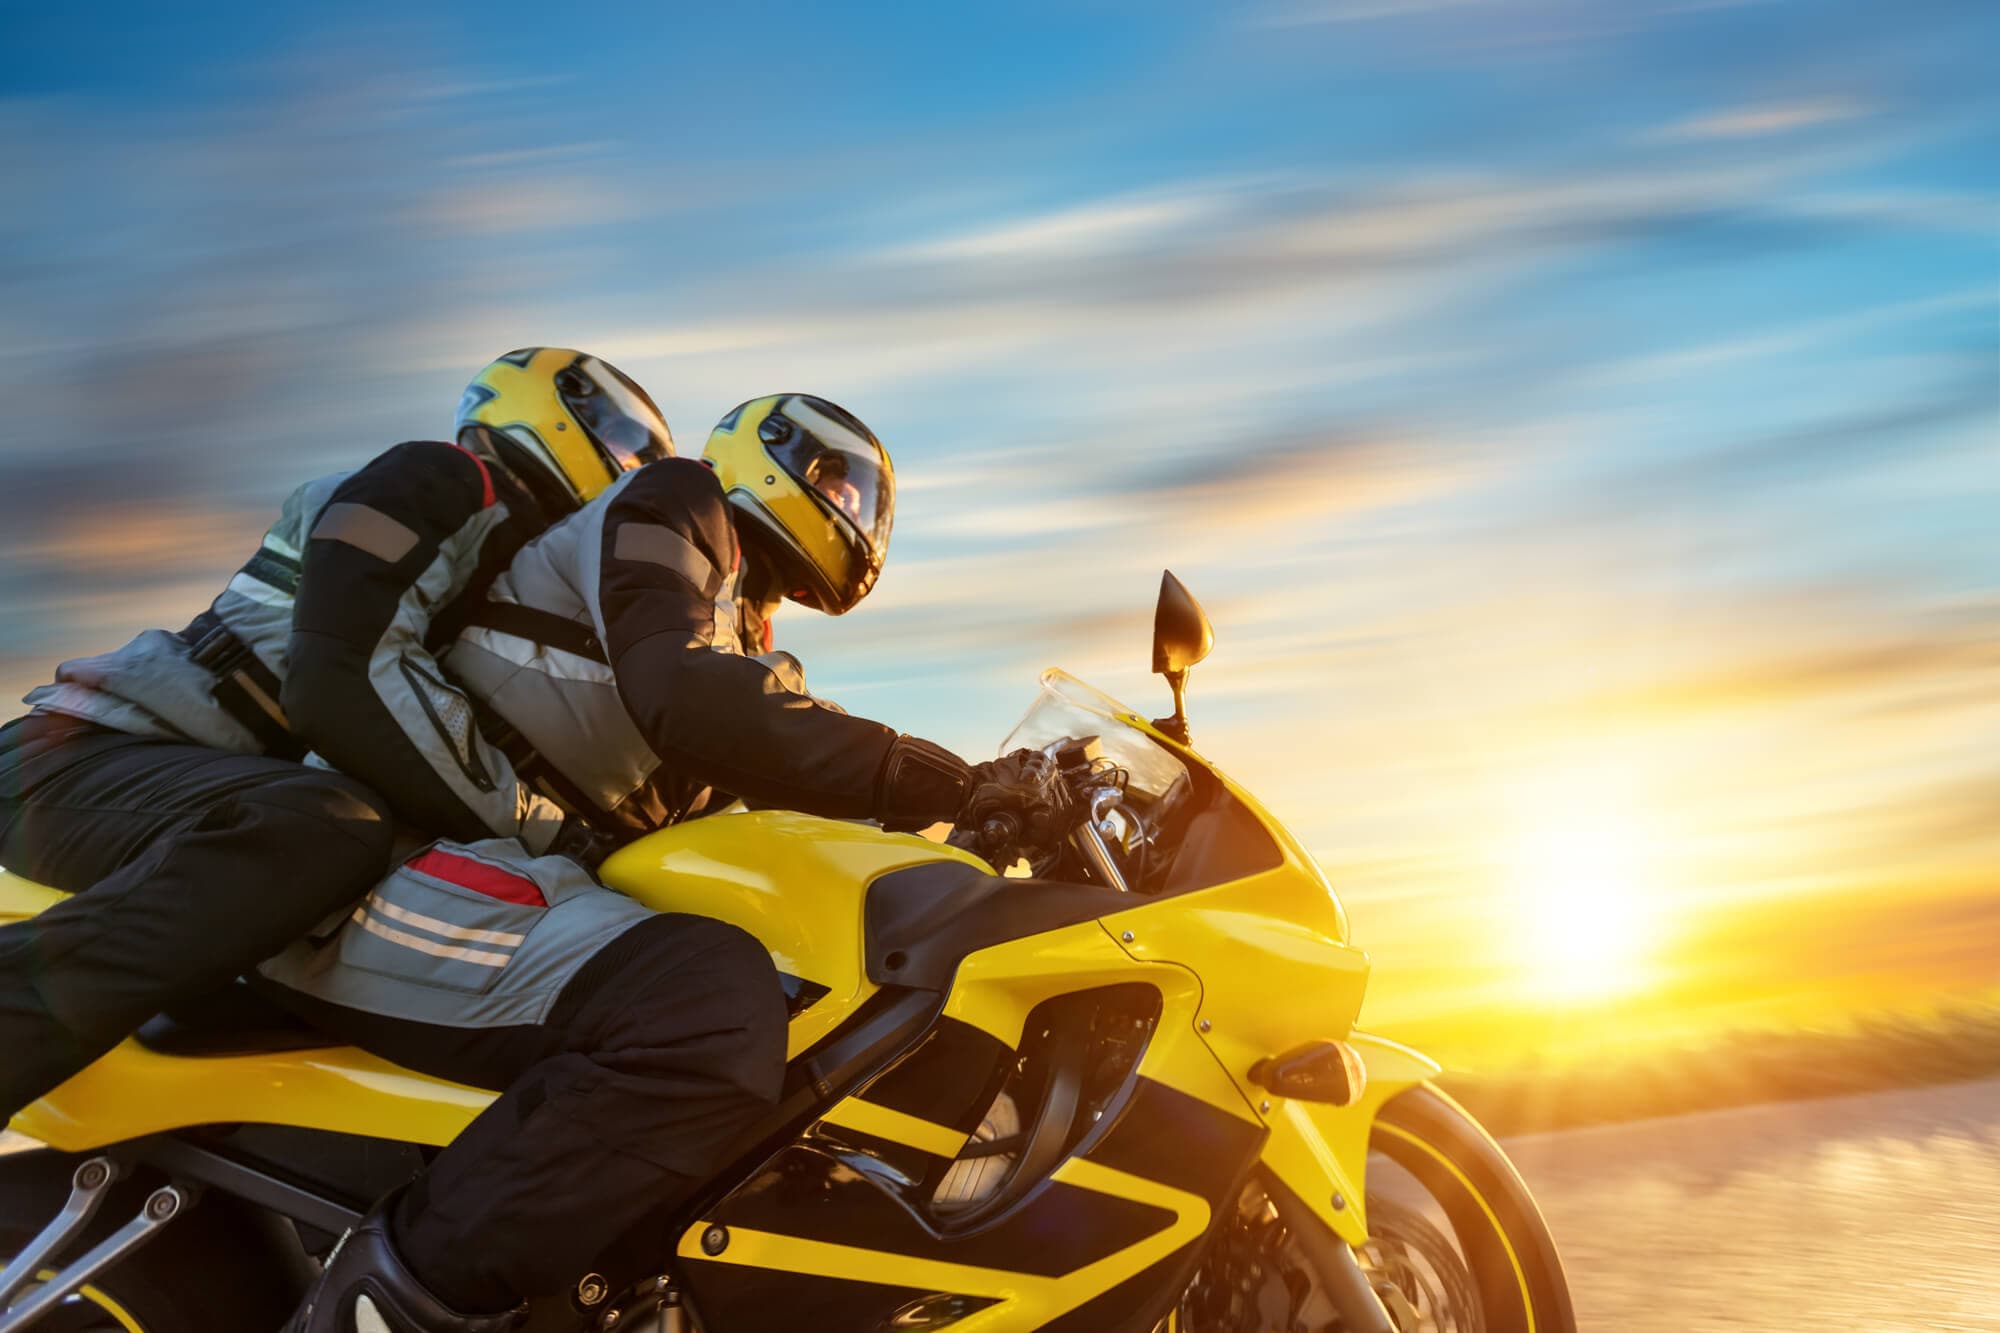 Stay Cool and Safe With the Best Textile Motorcycle Jackets